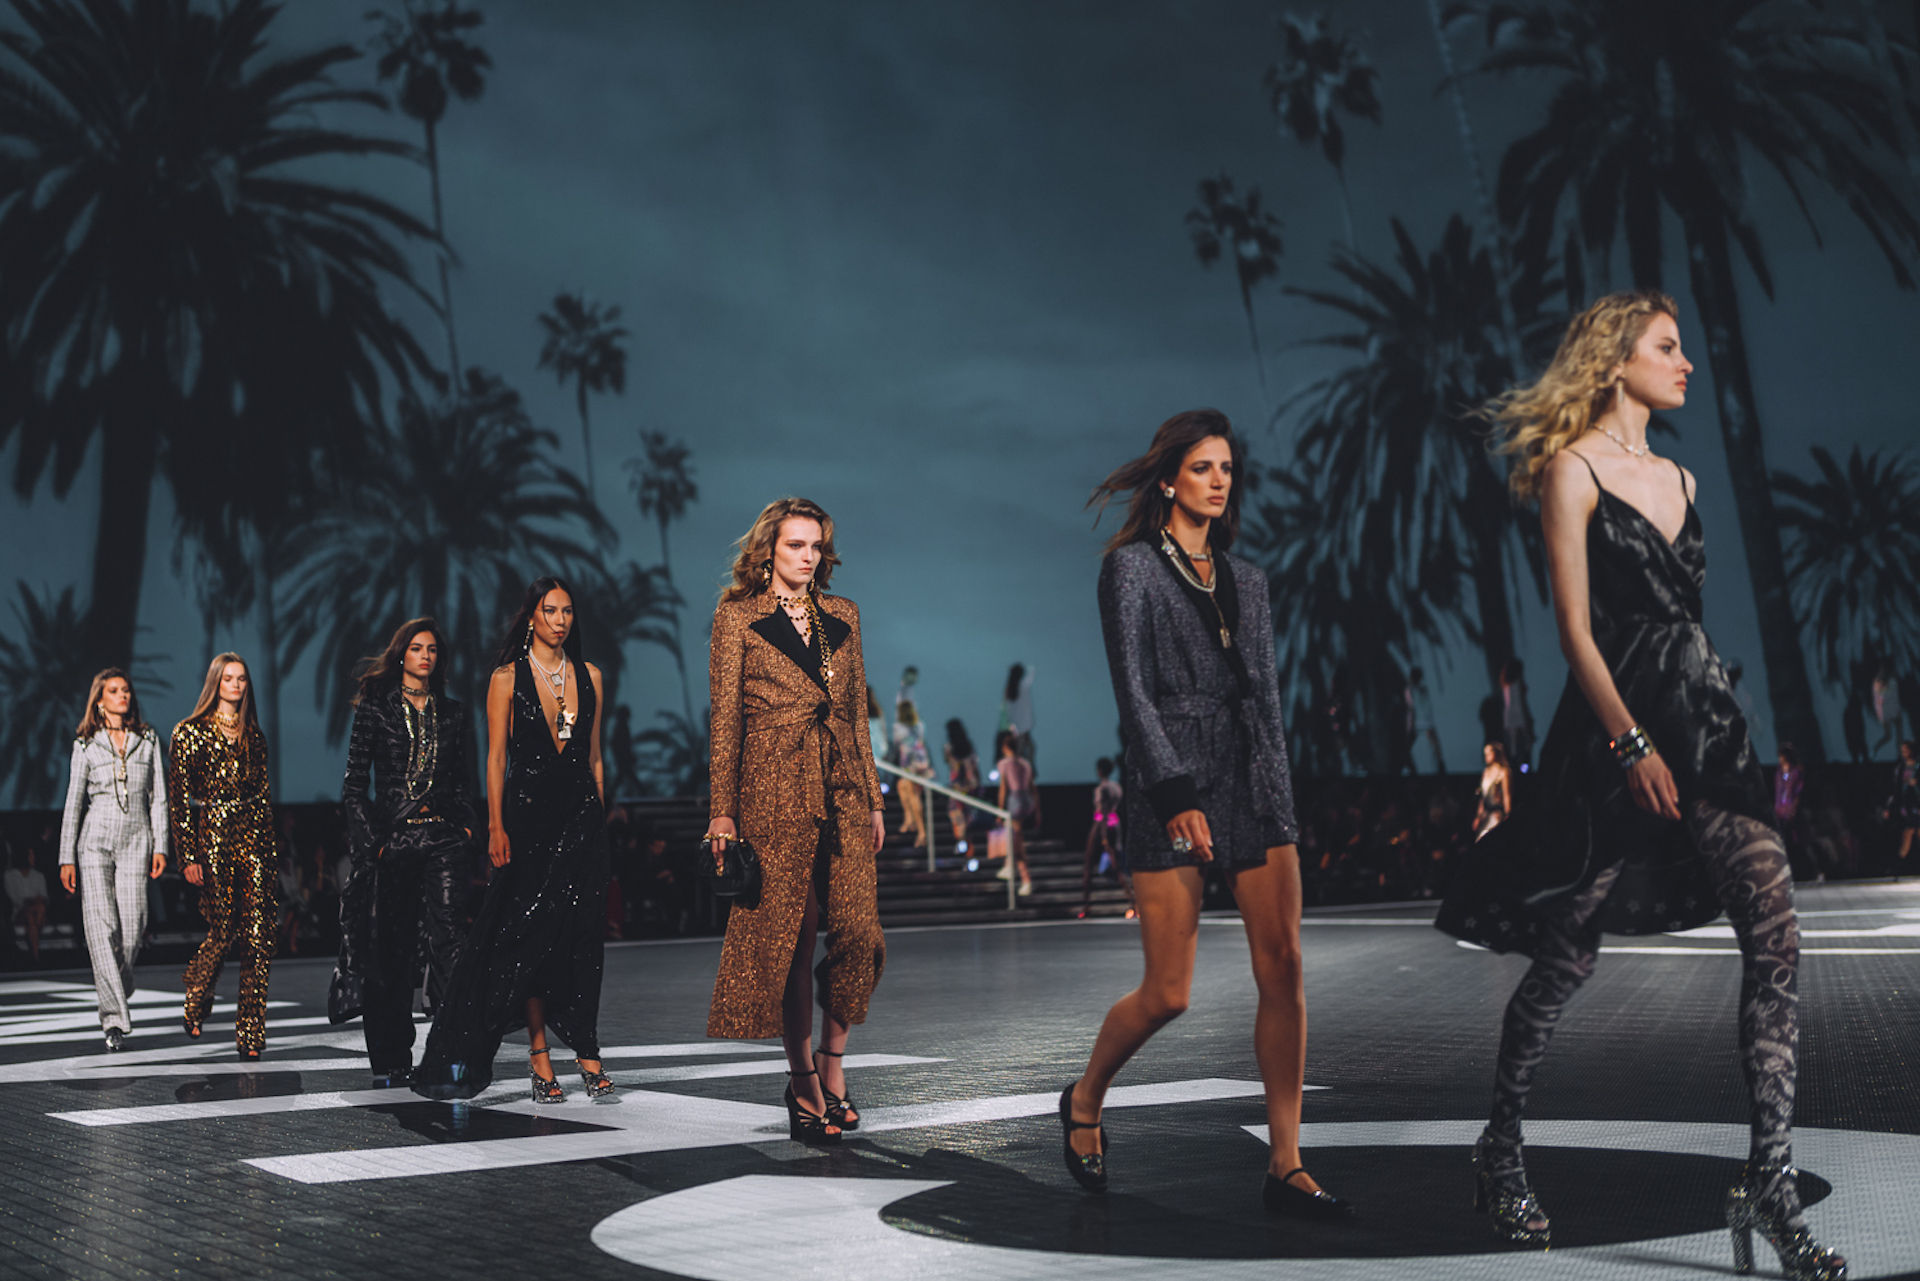 Preview of Chanel Cruise 2020 Collection - Spotted Fashion